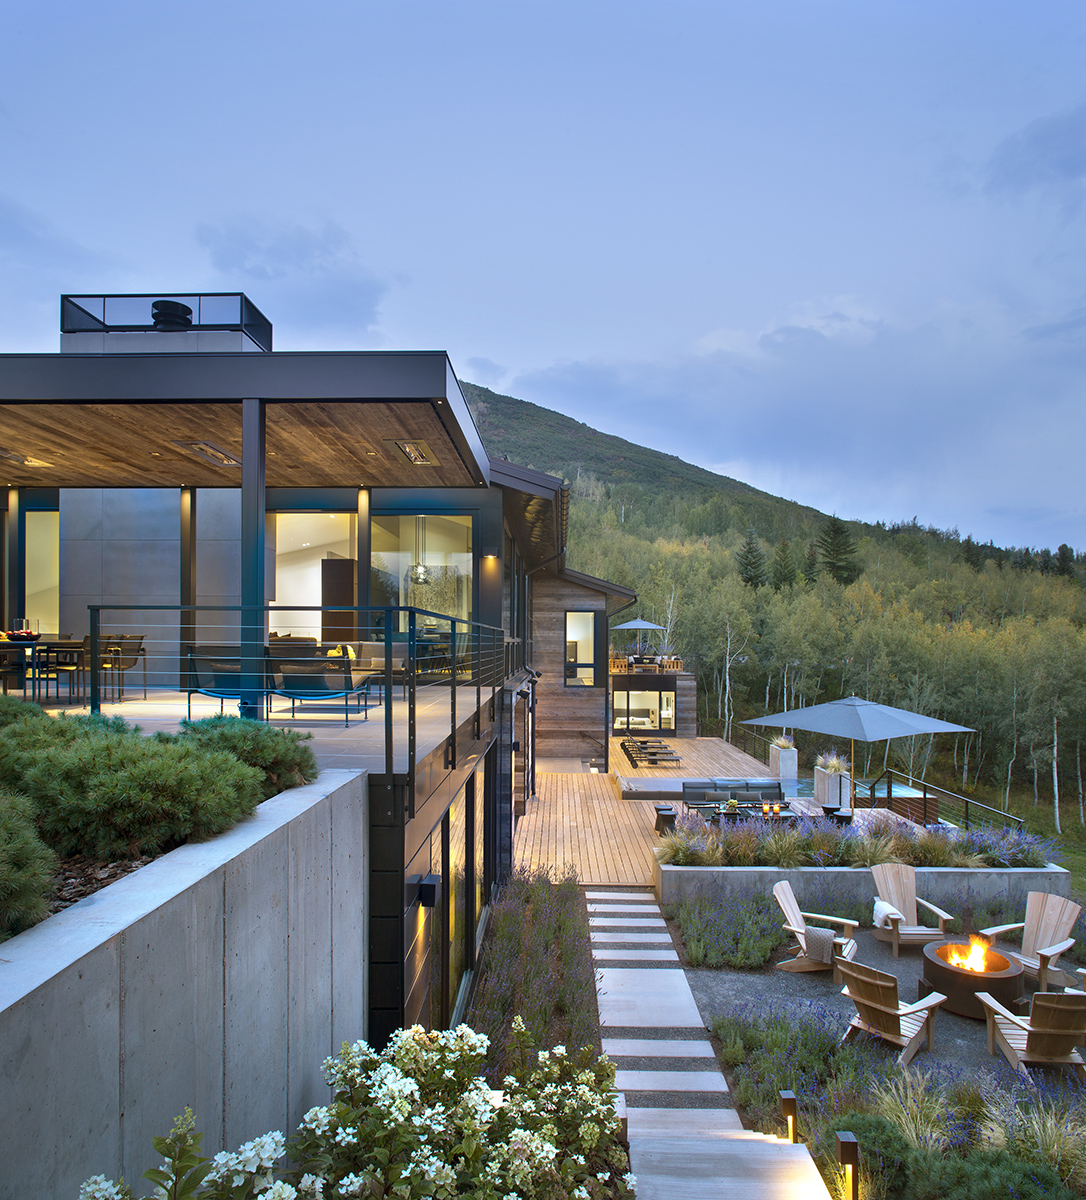 The Lookout - custom home build in Aspen with beautiful exterior design and landscape